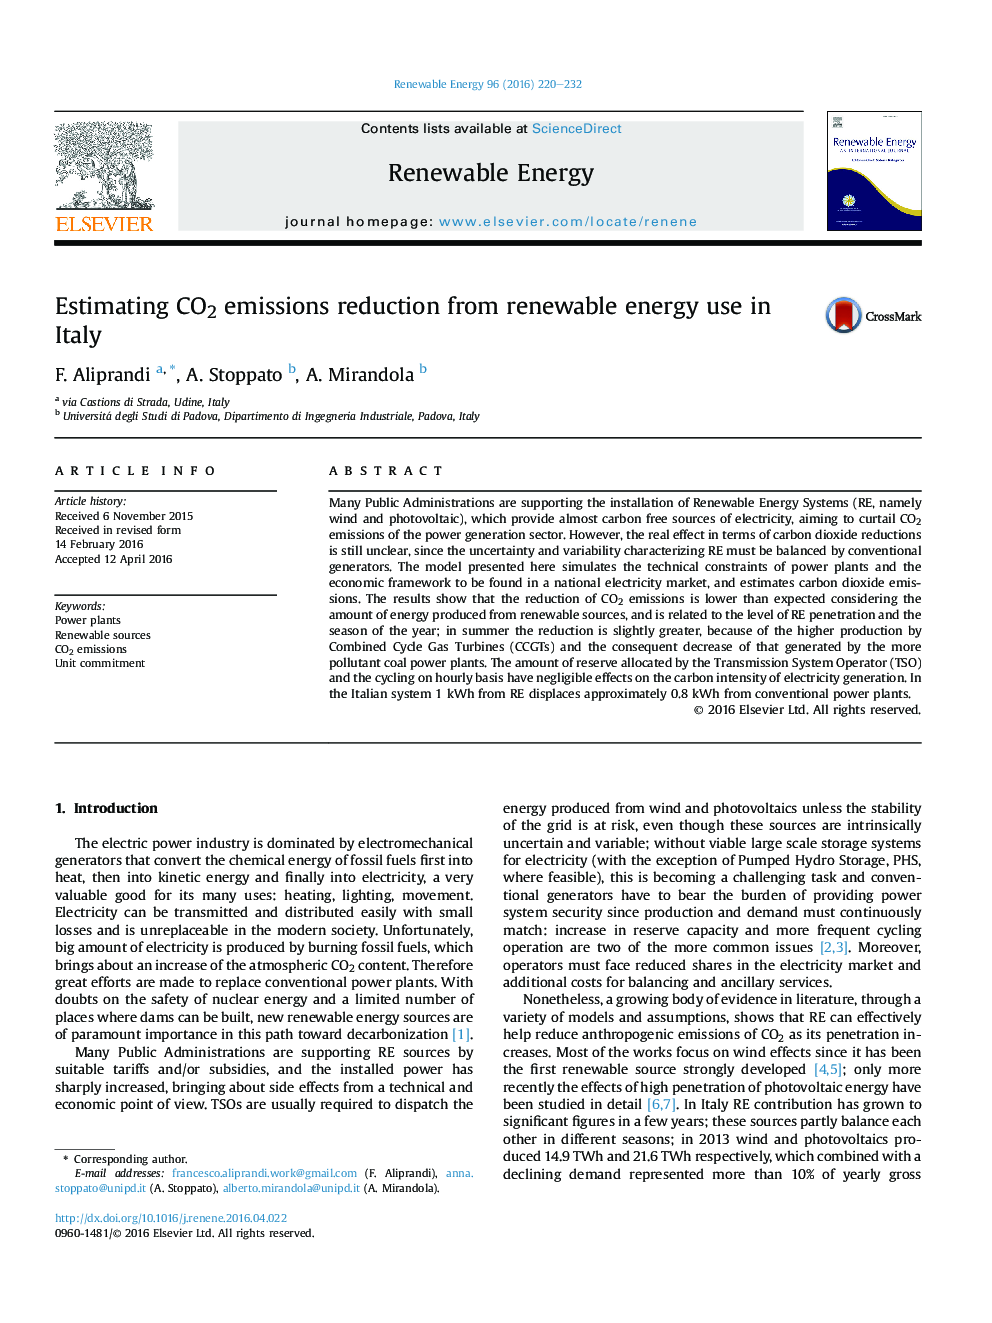 Estimating CO2 emissions reduction from renewable energy use in Italy